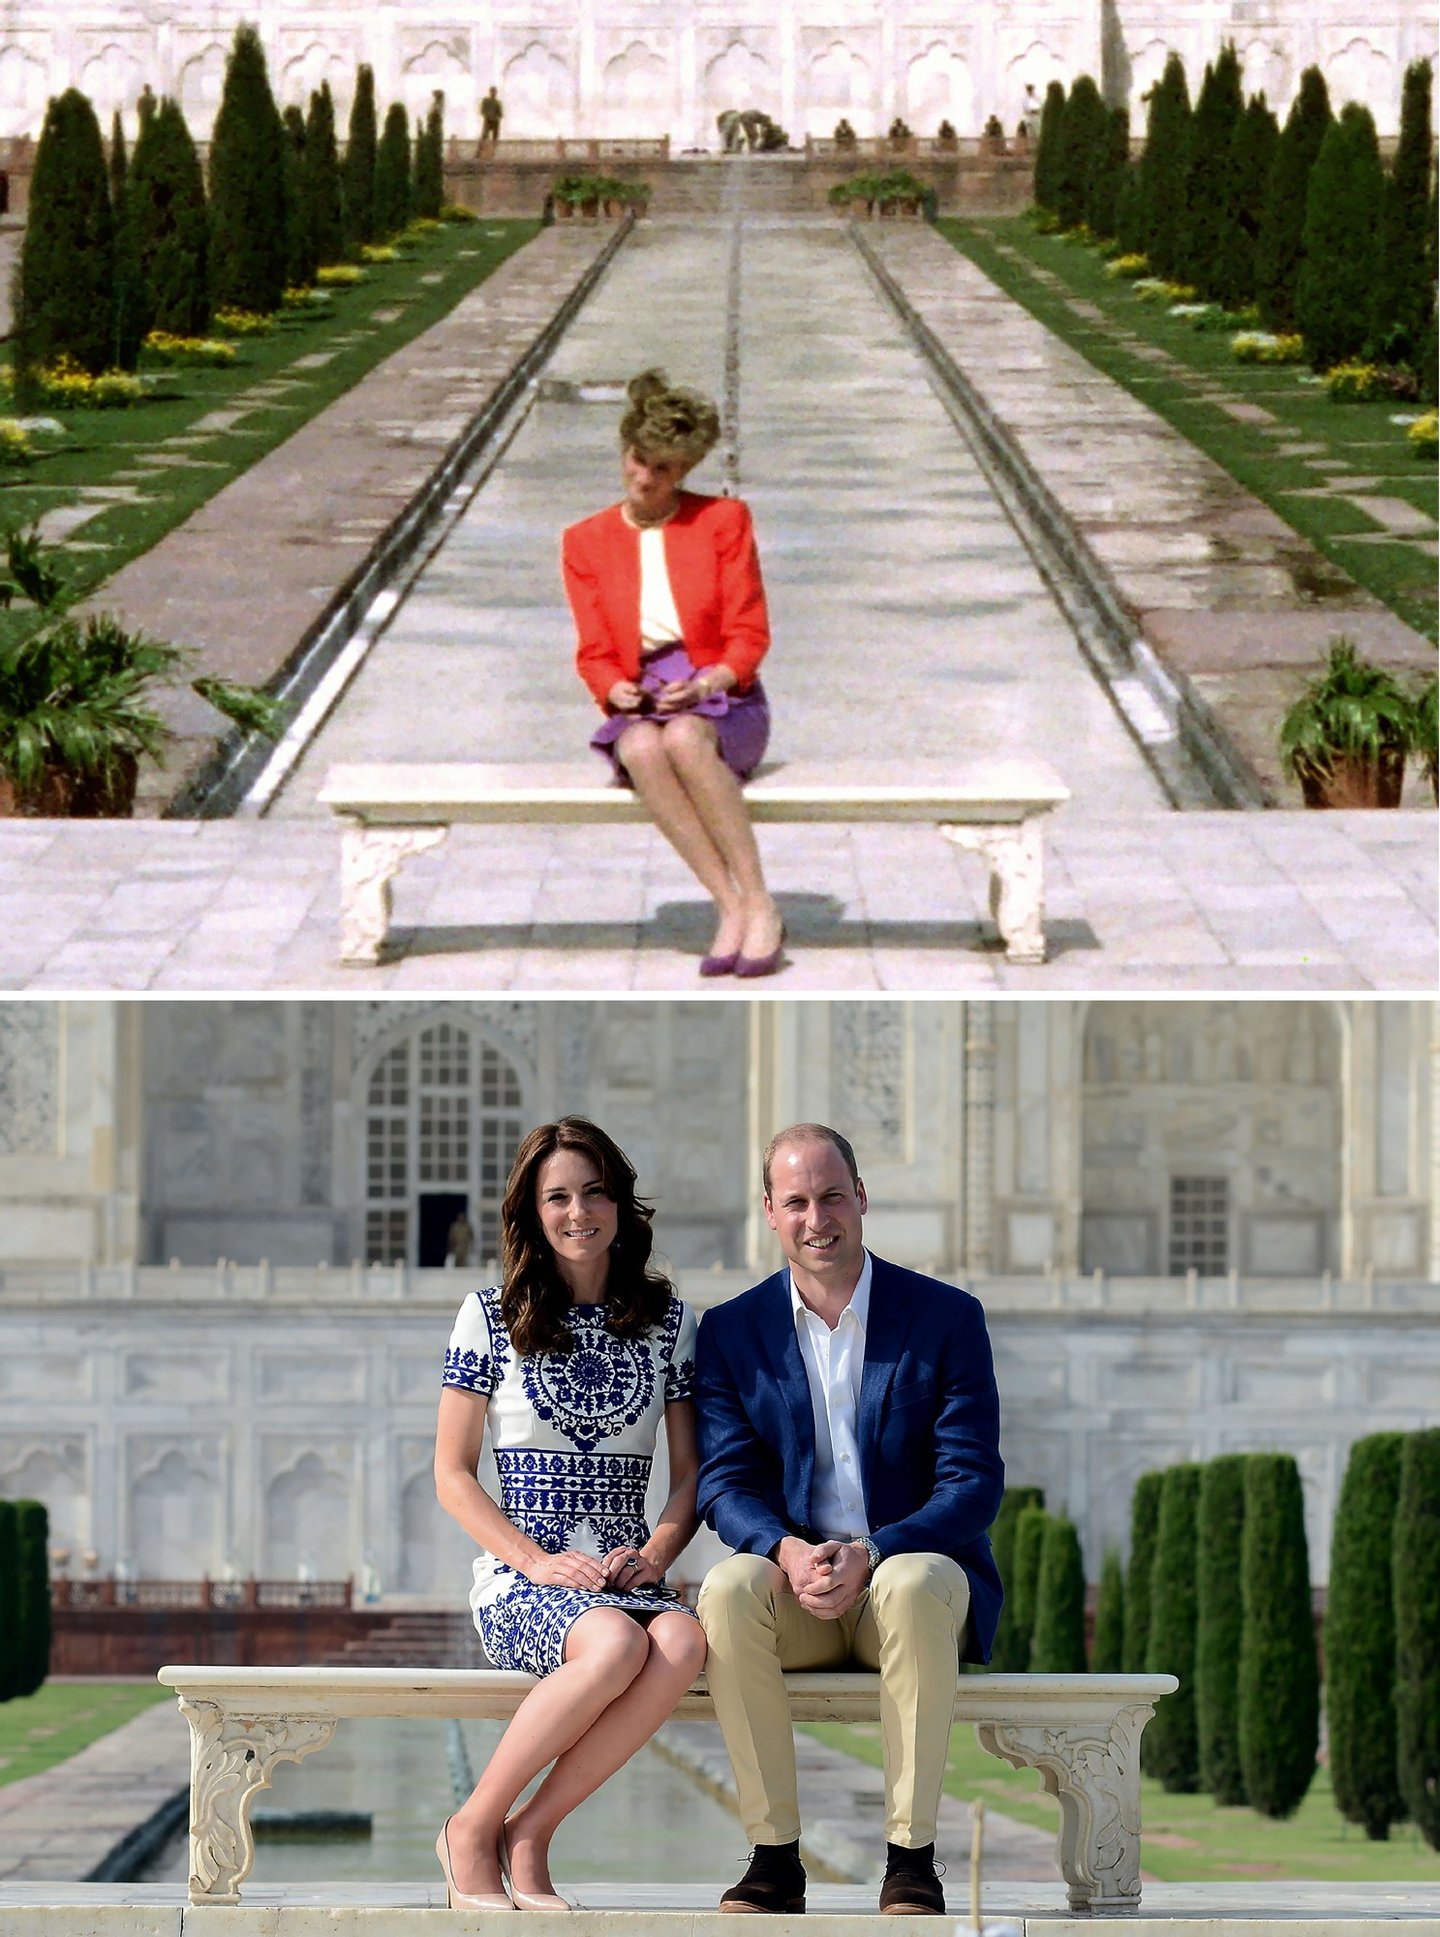 (FILES) This combination photograph shows (TOP) Princess Diana of Wales as she poses at The Taj Mahal in Agra on February 11, 1992, and (BOTTOM) Britain's Prince William, Duke of Cambridge(R)and Catherine, Duchess of Cambridge as they pose during their visit to The Taj Mahal in Agra on April 16, 2016. Prince William and his wife Catherine arrived at the Taj Mahal, wrapping up their week-long trip to India and Bhutan with a visit that carries poignant echoes for Britain's royal family. / AFP / AFP AND POOL / Money SHARMA AND Douglas CURRAN (Photo credit should read MONEY SHARMA,DOUGLAS CURRAN/AFP/Getty Images)